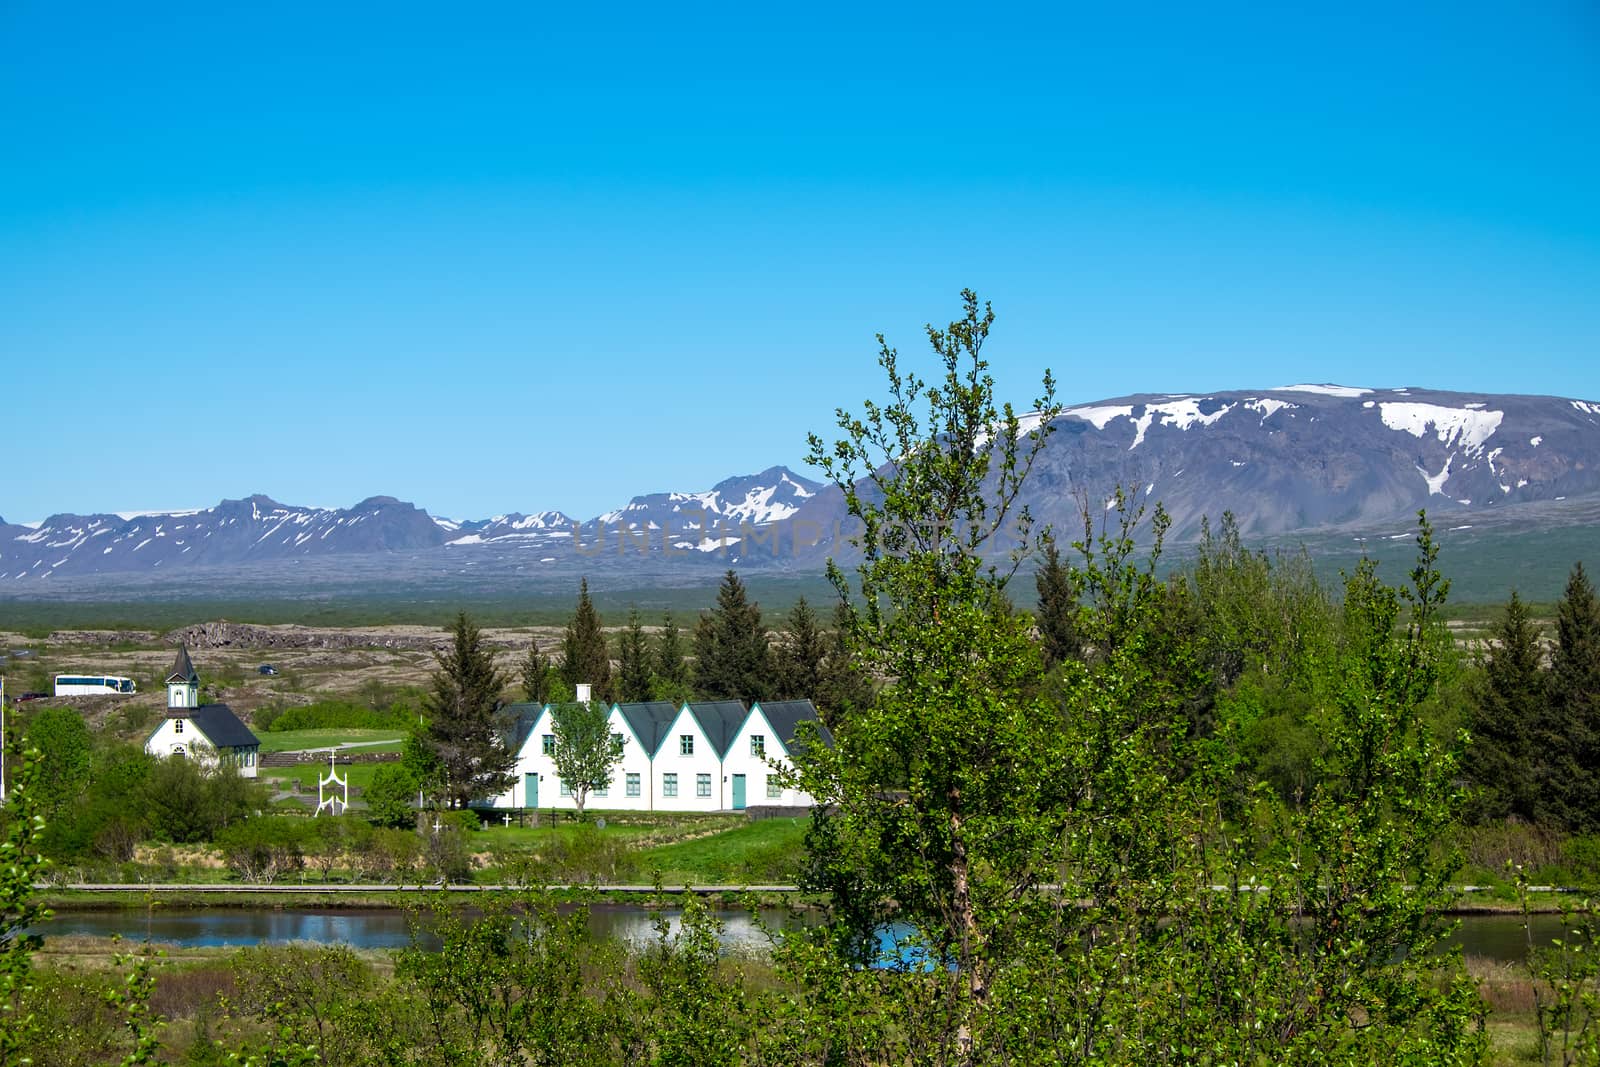 The famous Thingvellir National Park in Iceland